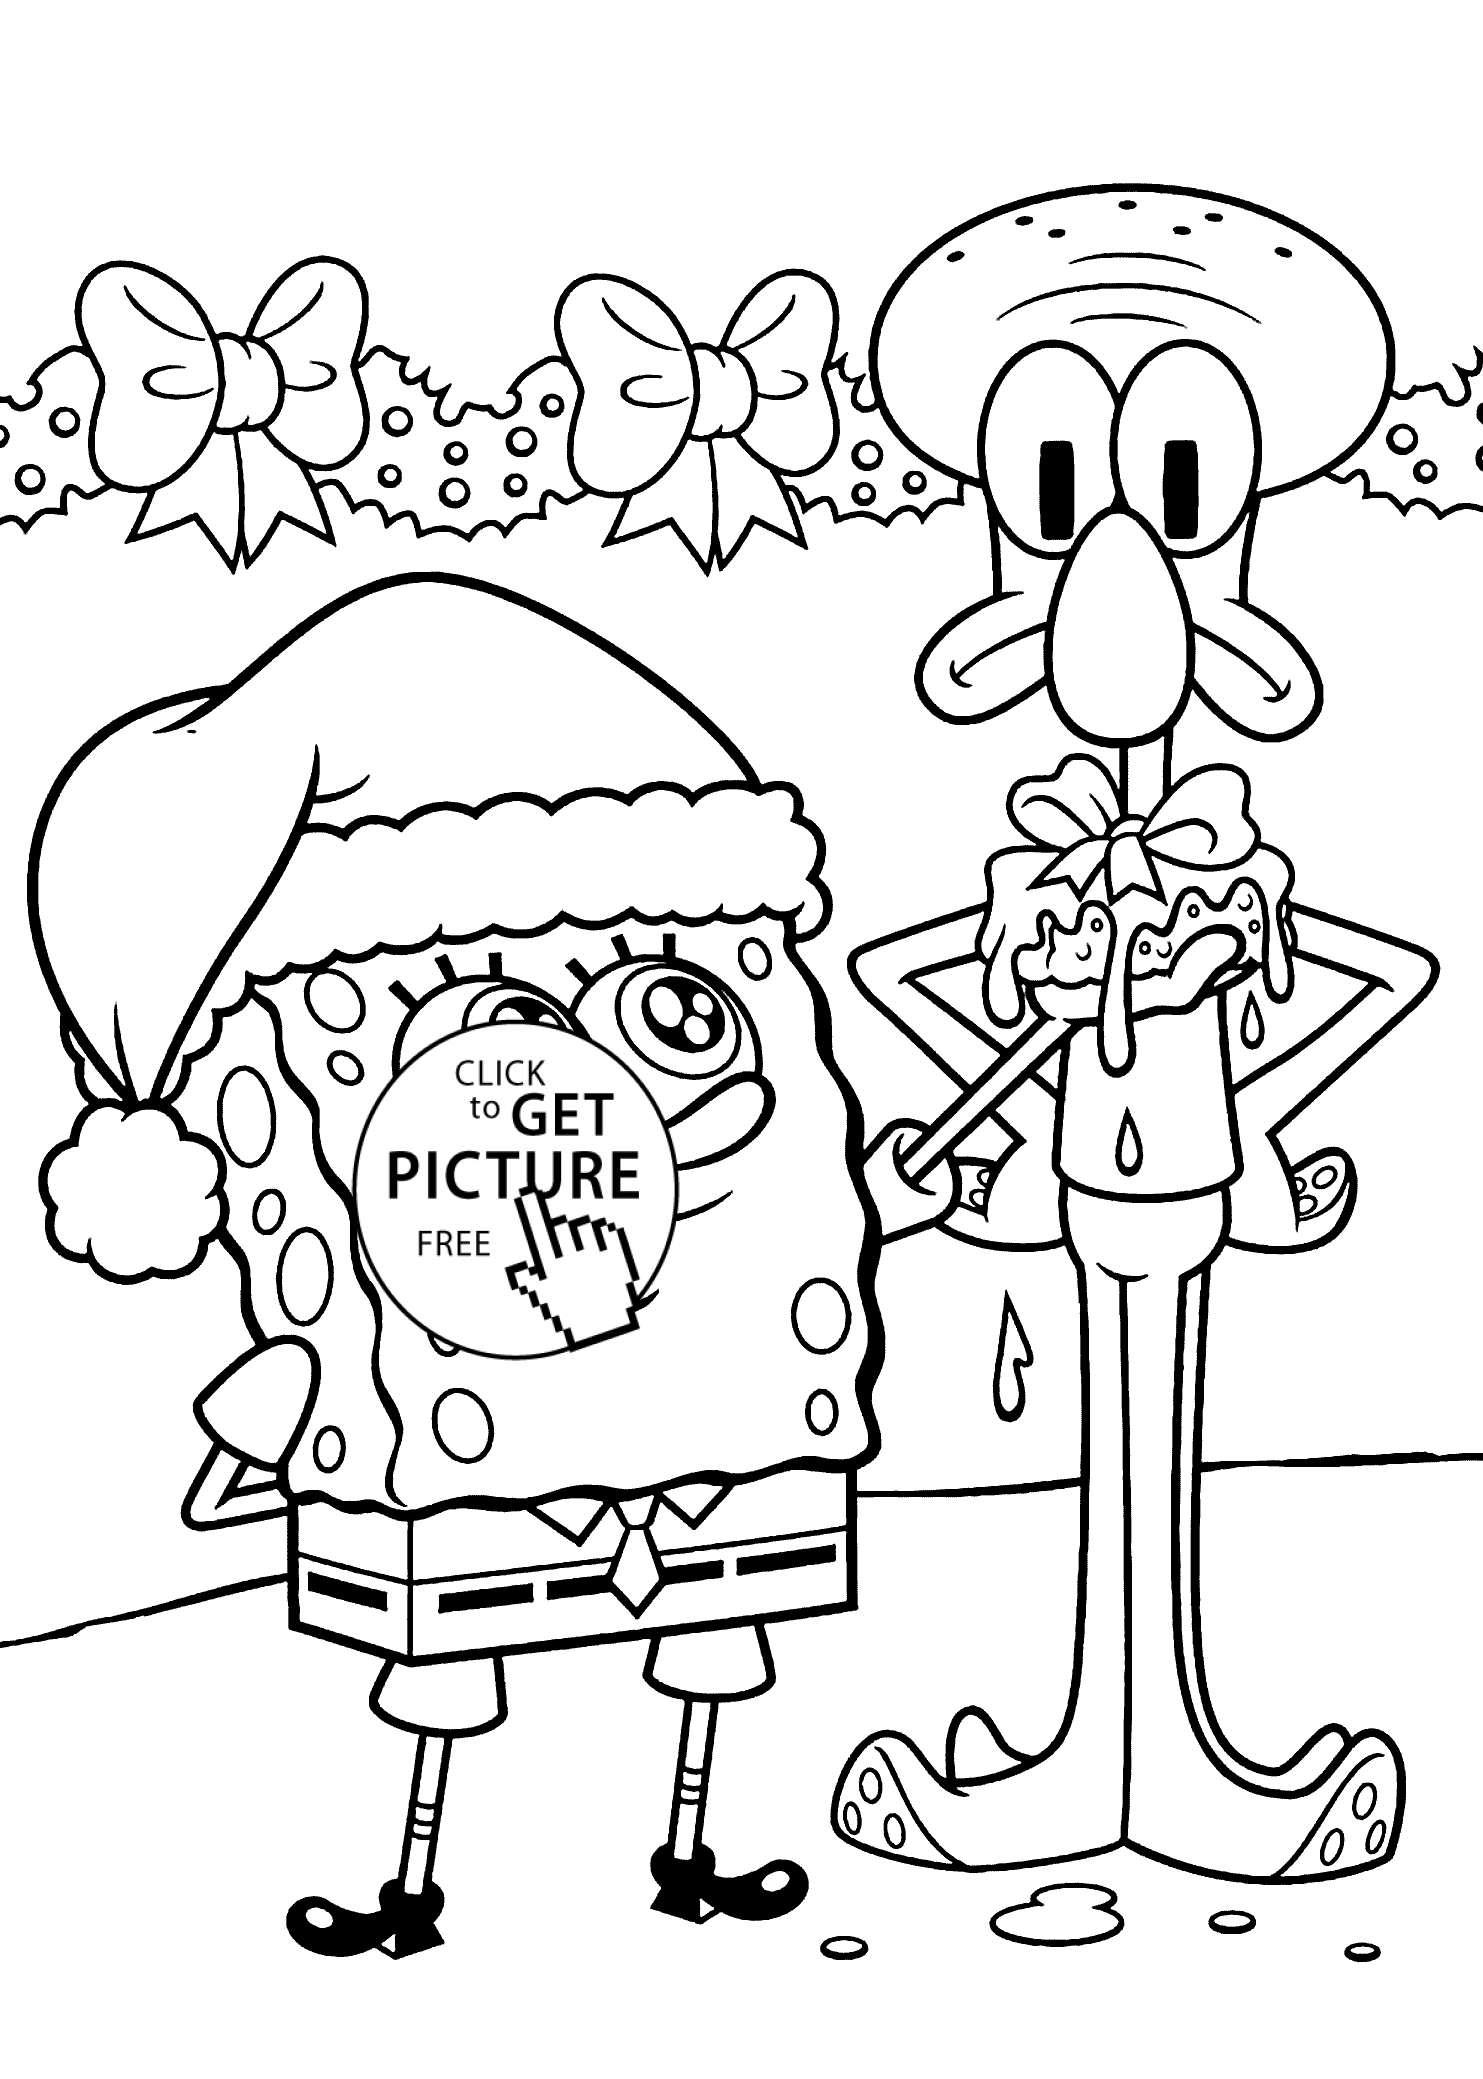 Funny Spongebob Coloring Pages Printables 37